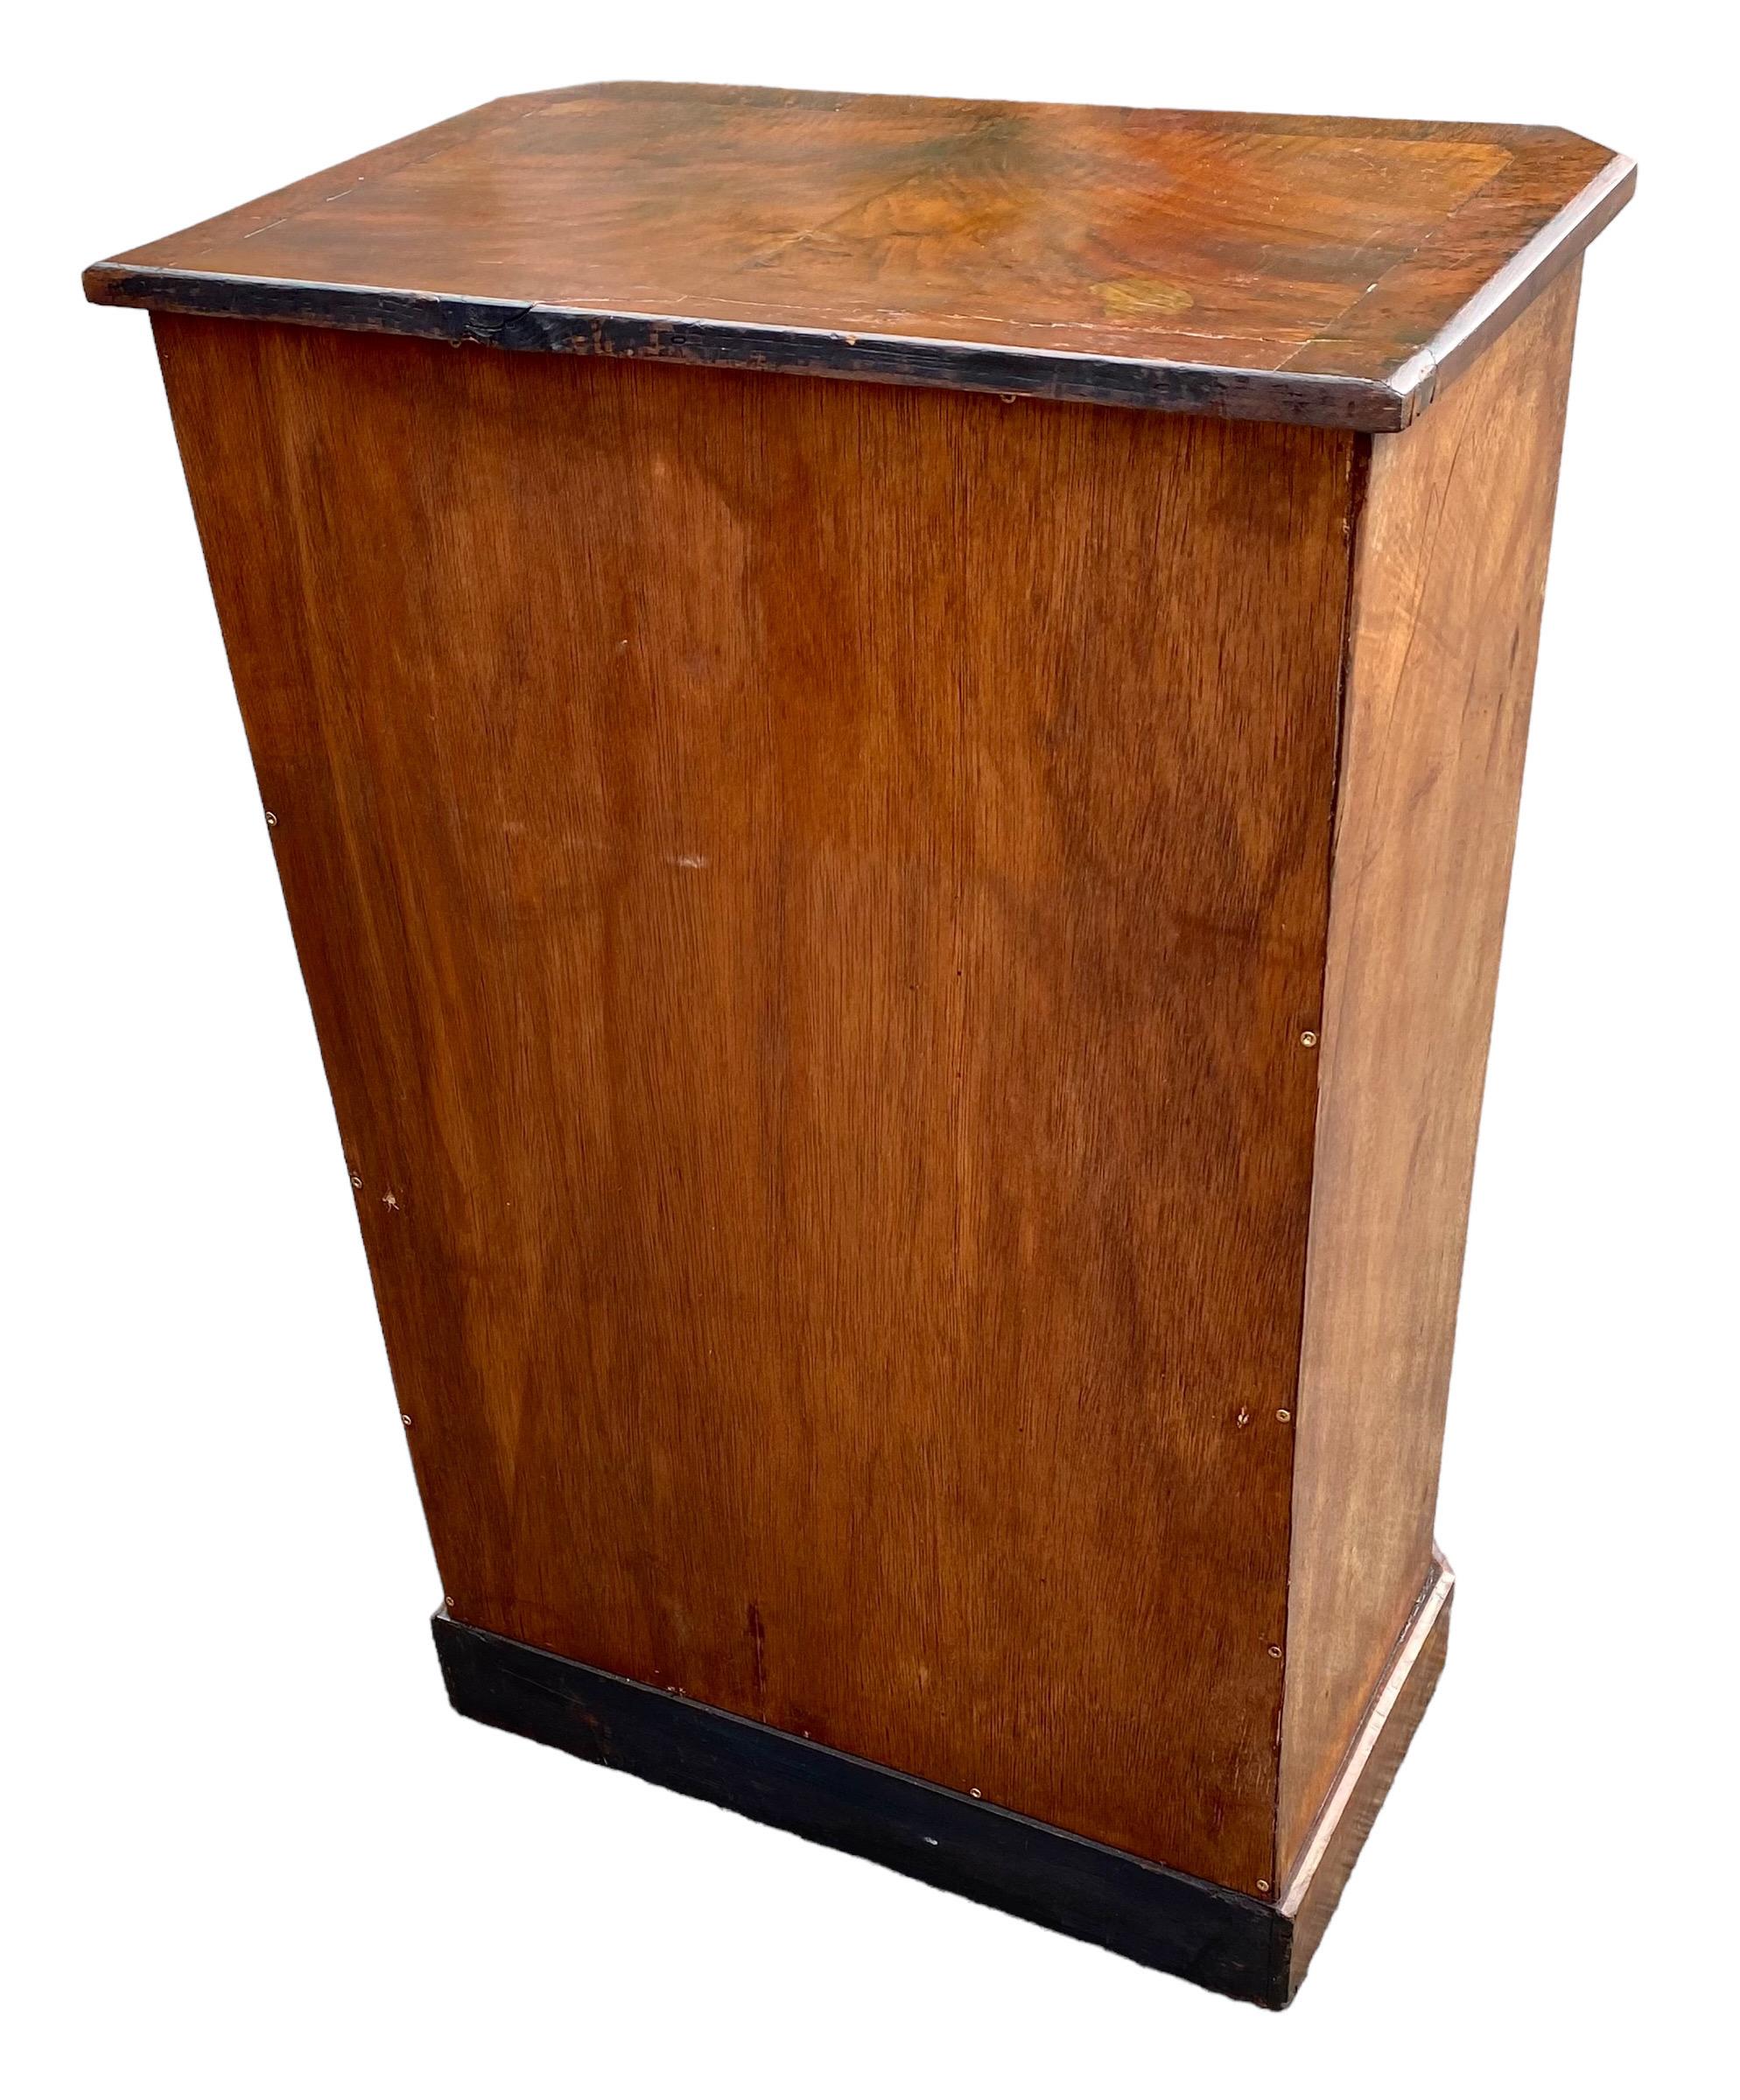 Satinwood Early 20th Century Antique Edwardian Walnut and Marquetry Pier Cabinet For Sale